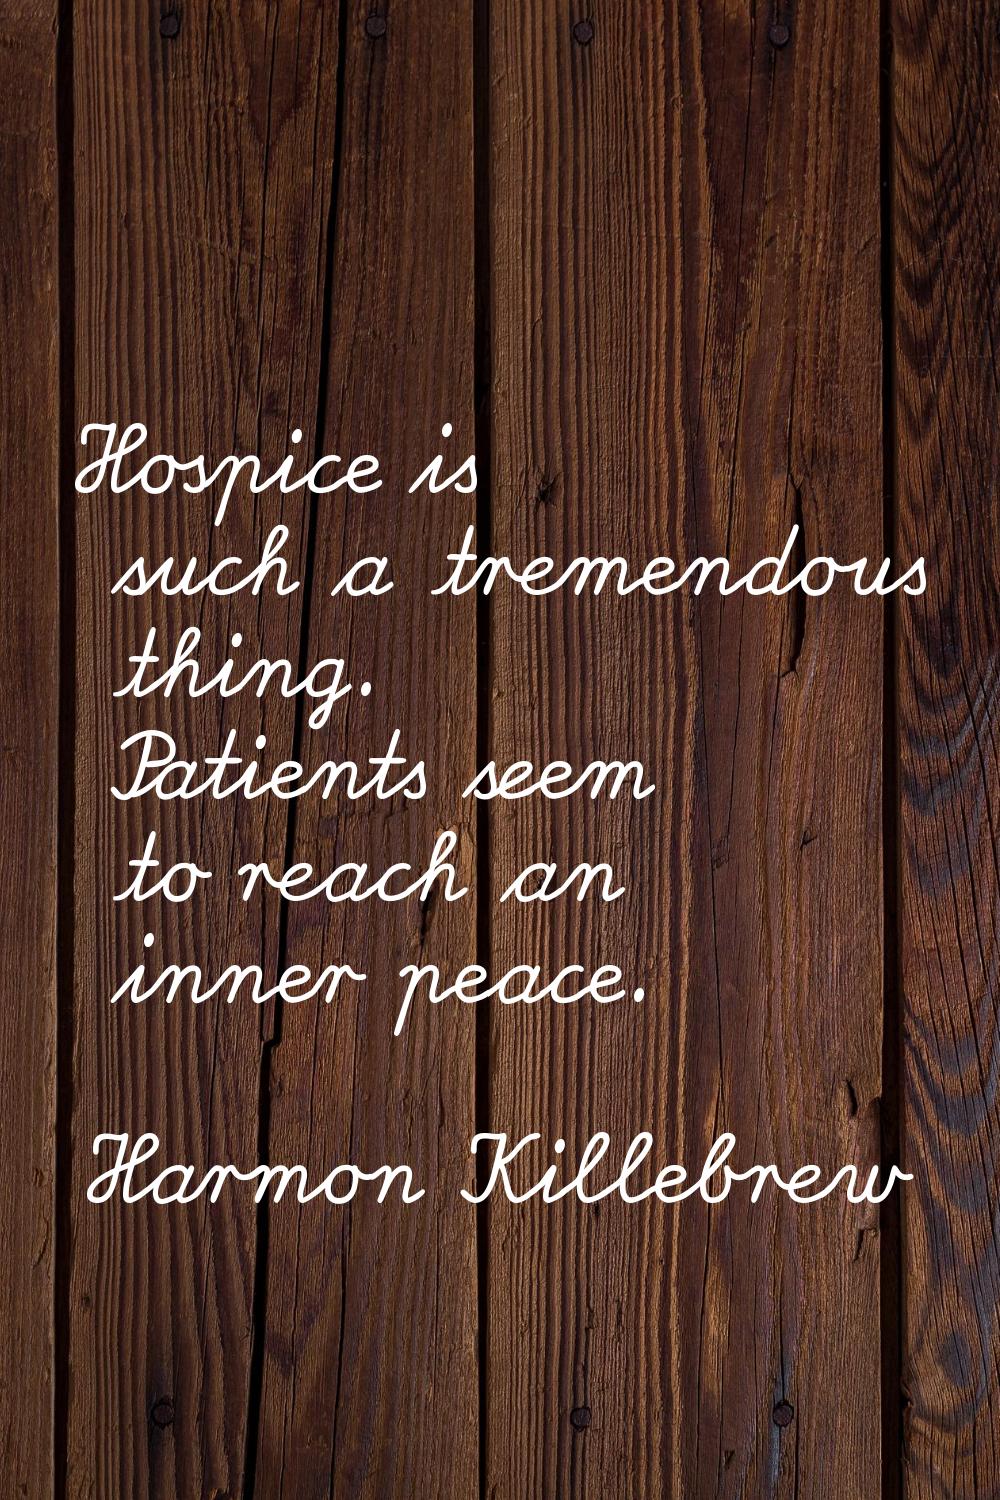 Hospice is such a tremendous thing. Patients seem to reach an inner peace.